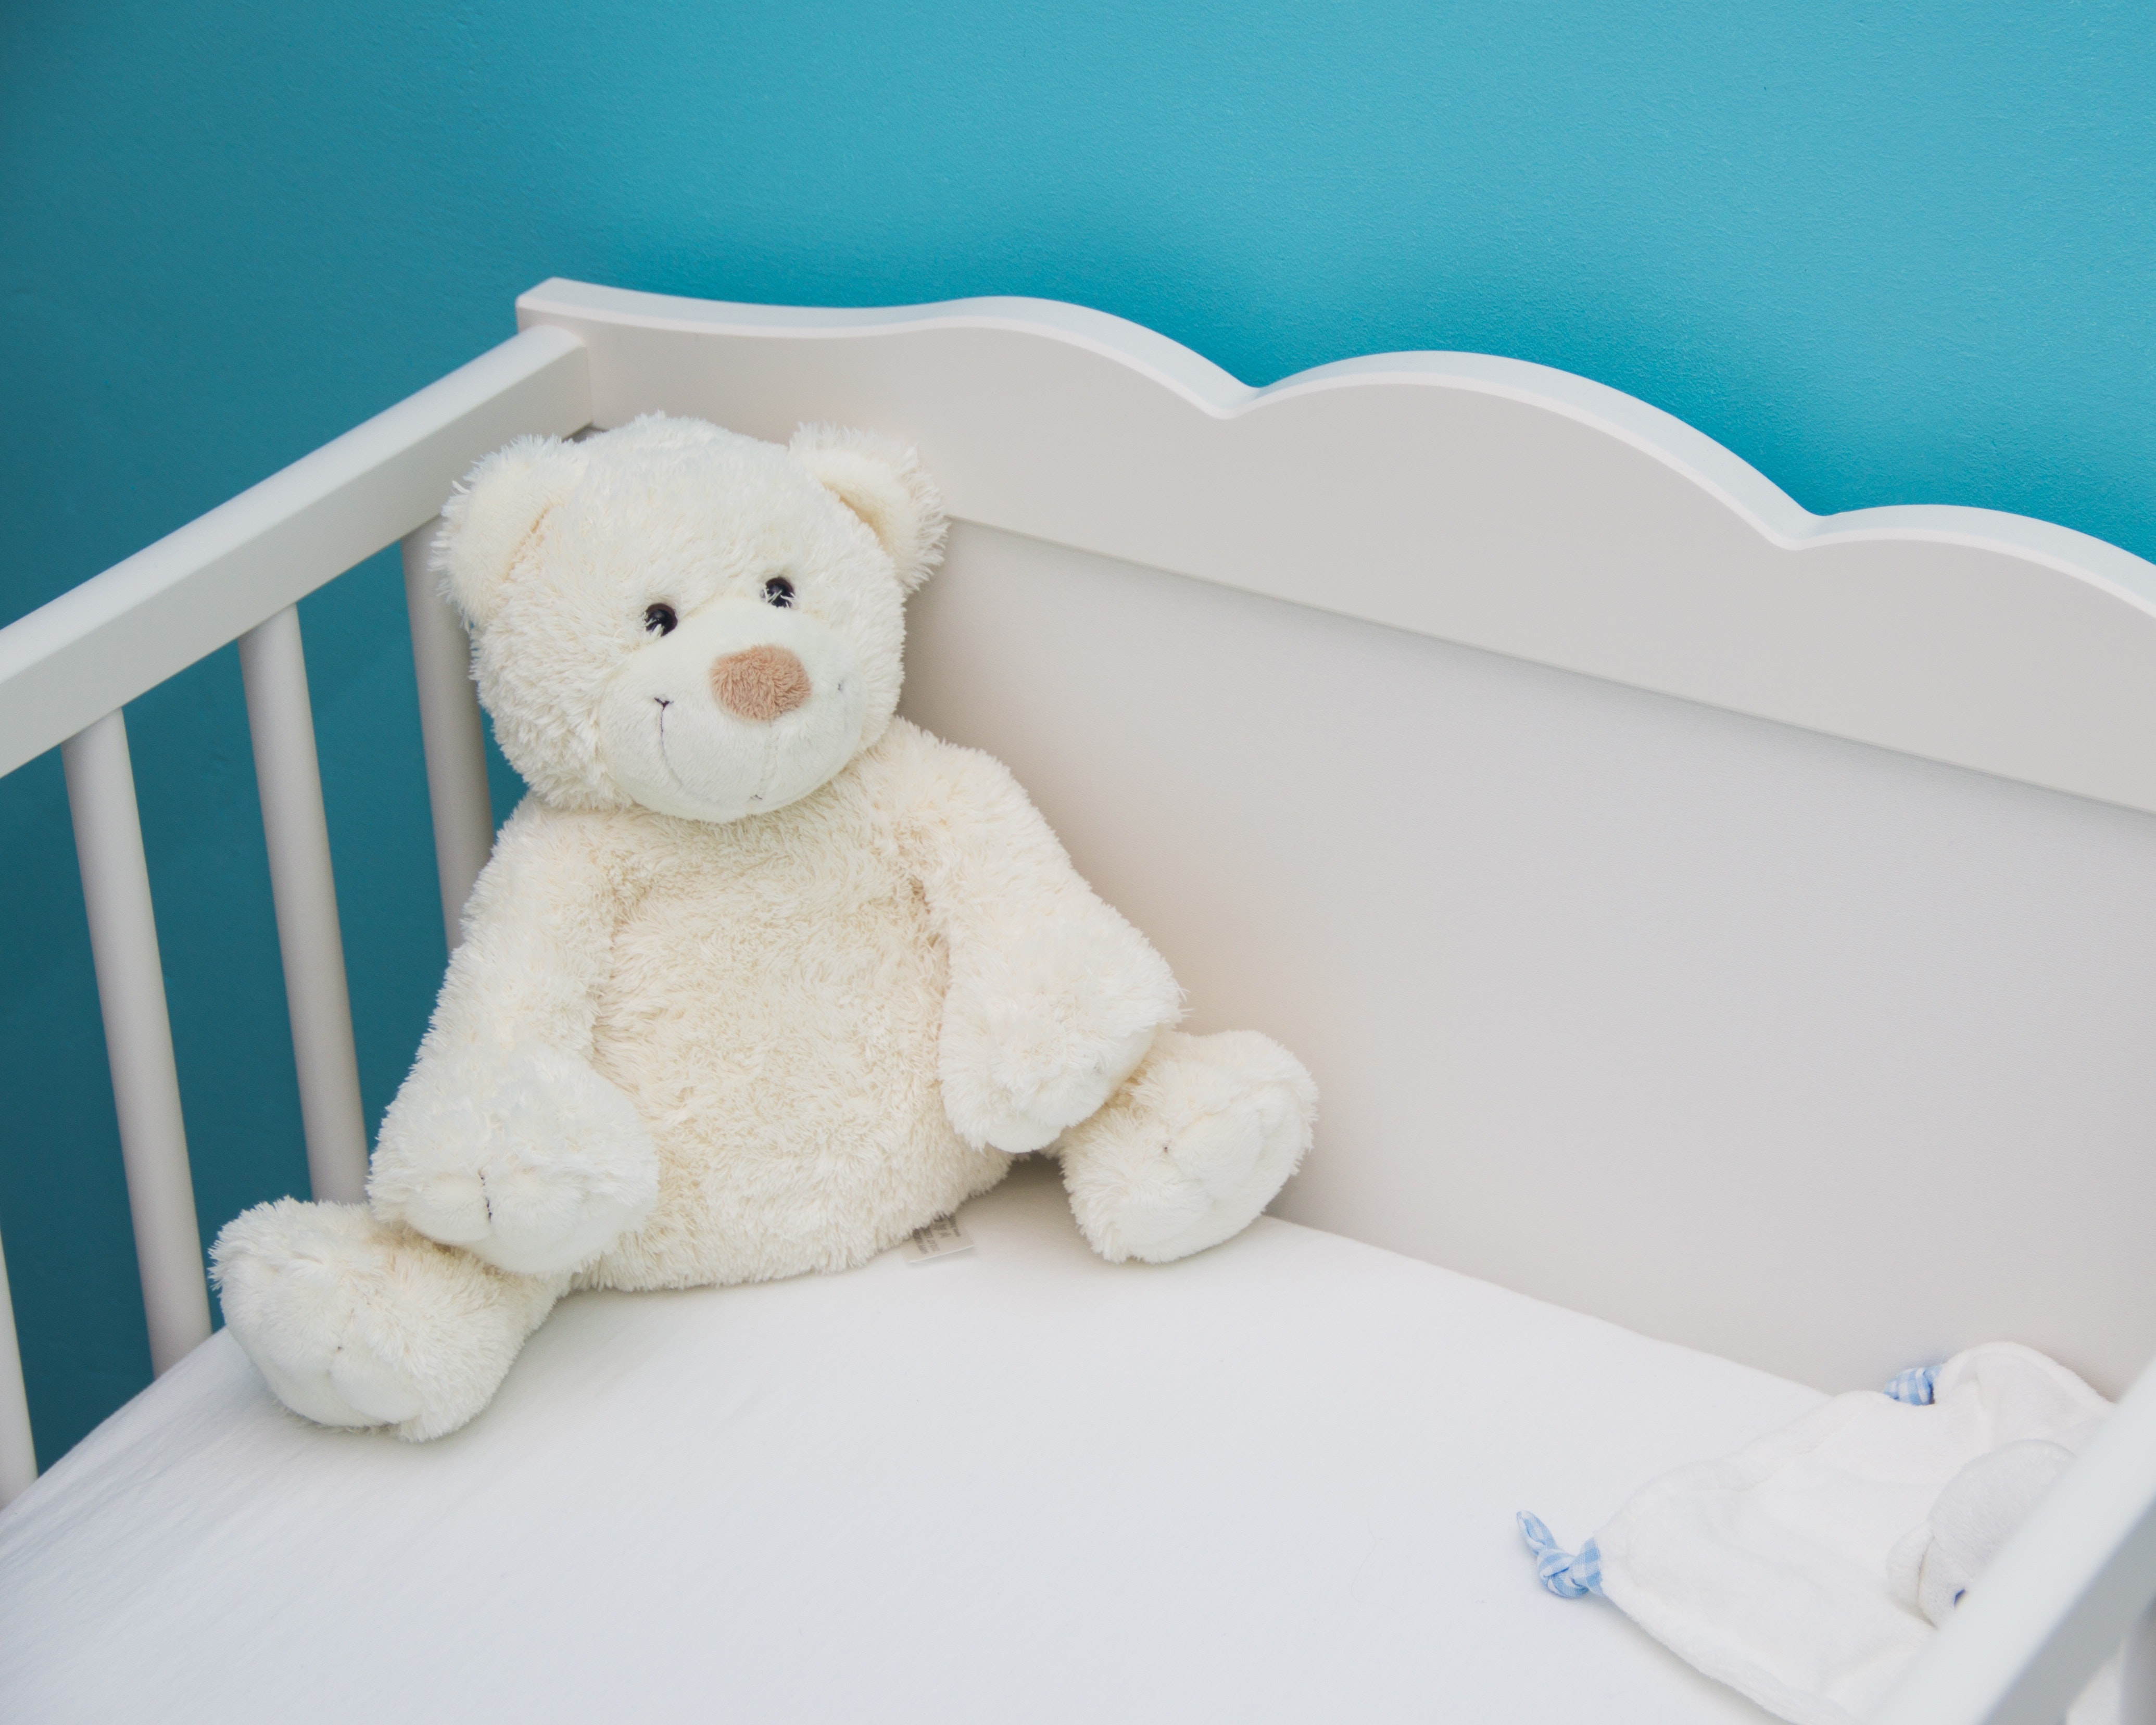 How to Get Baby to Sleep in Bassinet or Crib